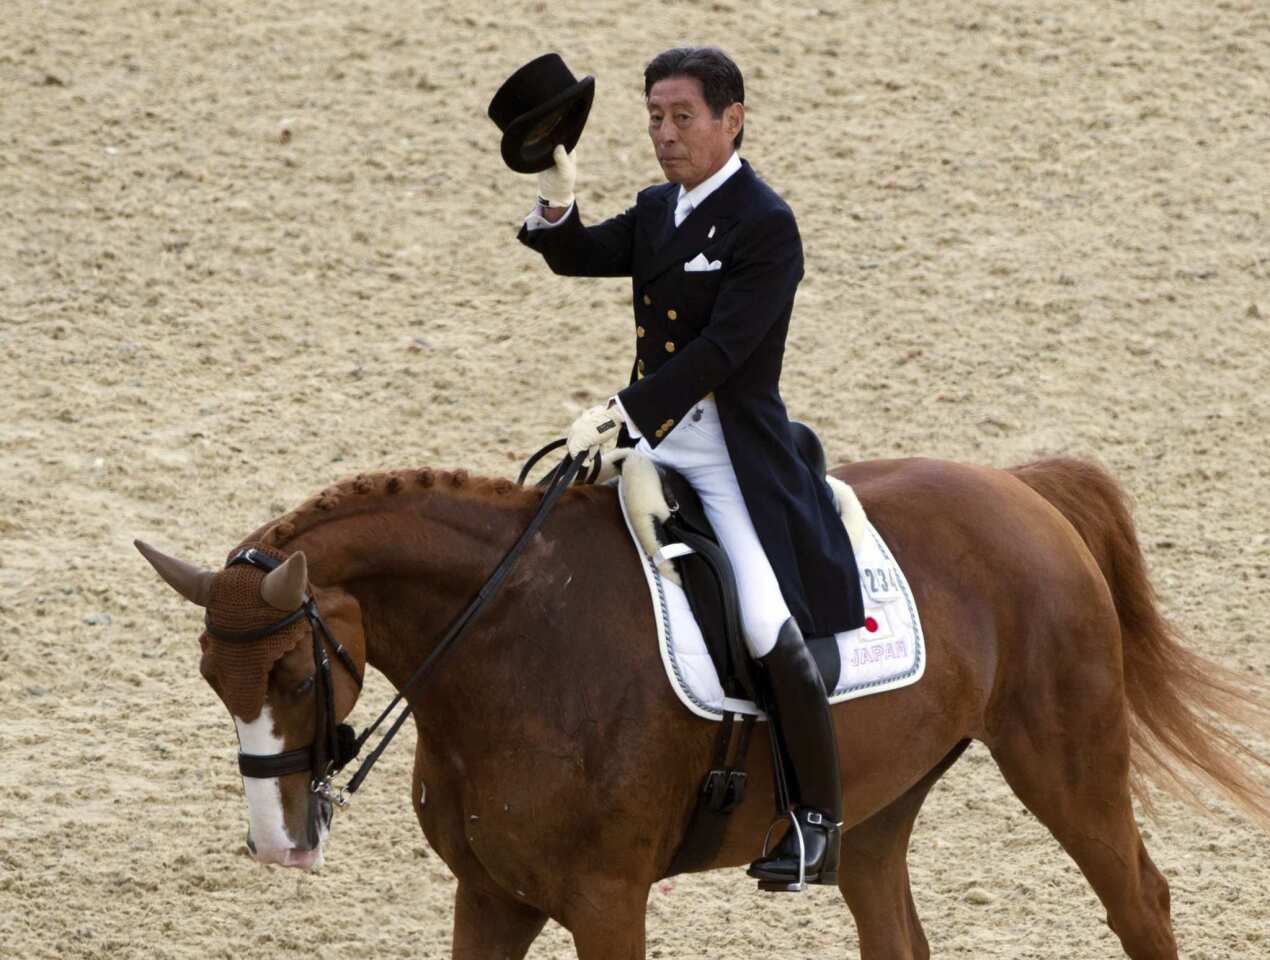 At 71, Japan's Hiroshi Hoketsu is the oldest athlete to compete in the 2012 Olympics.